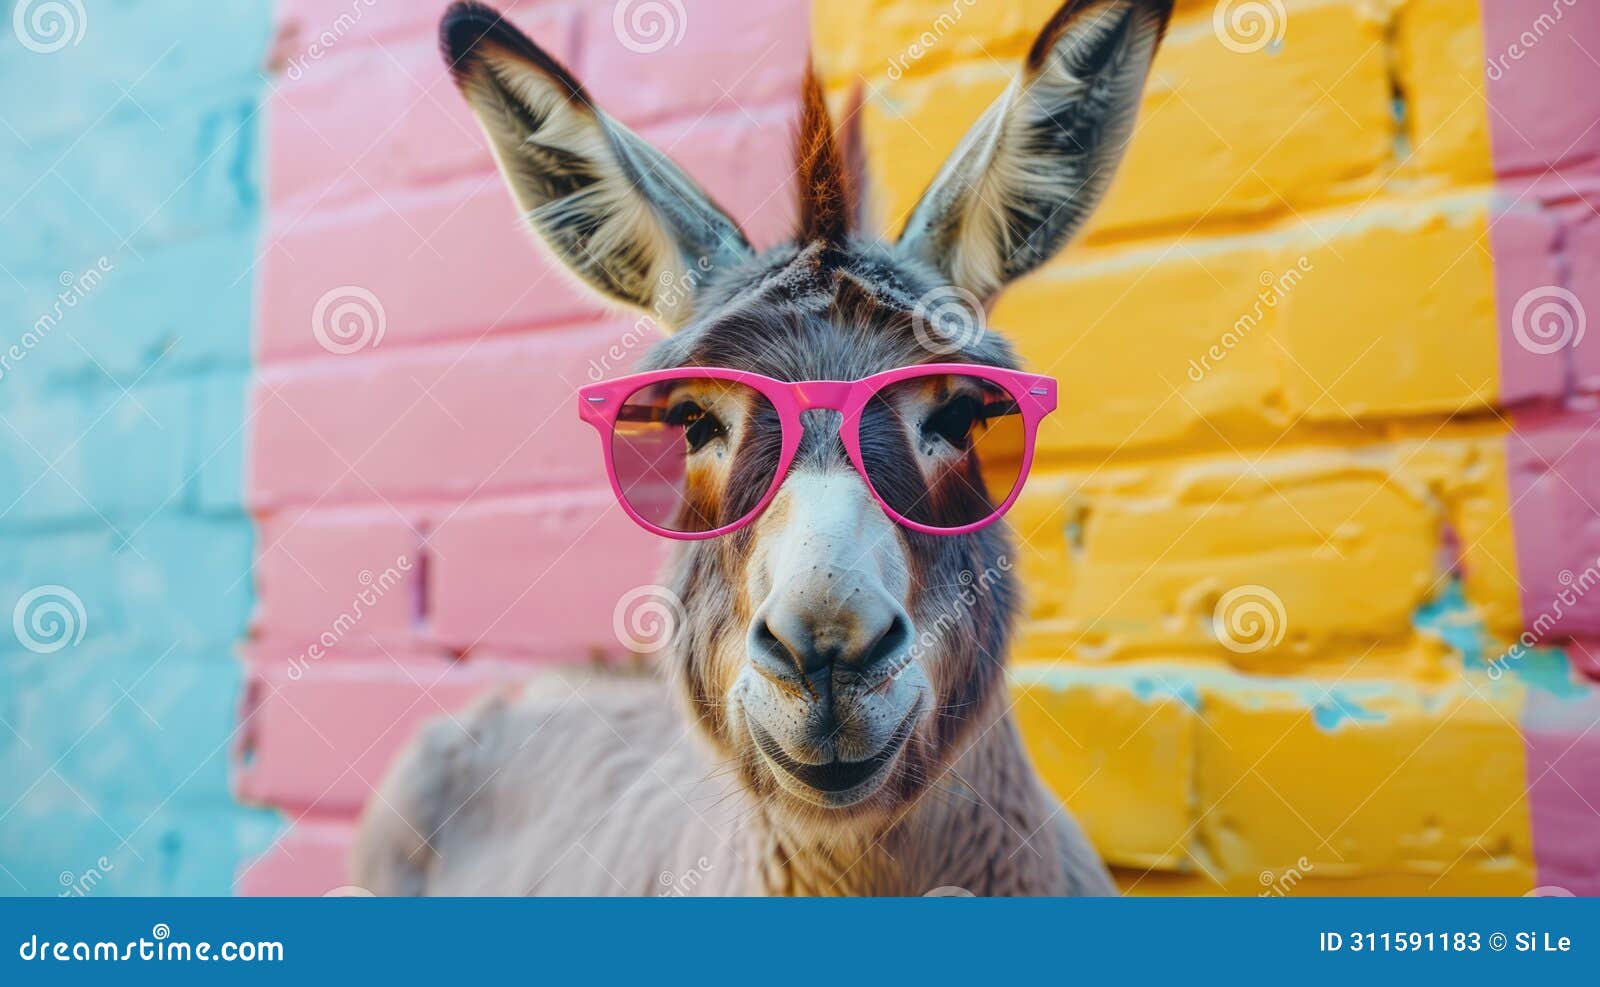 chill donkey in pastel shades: a fun wall art depicting a laidback animal with cool sunglasses against a colorful backdrop